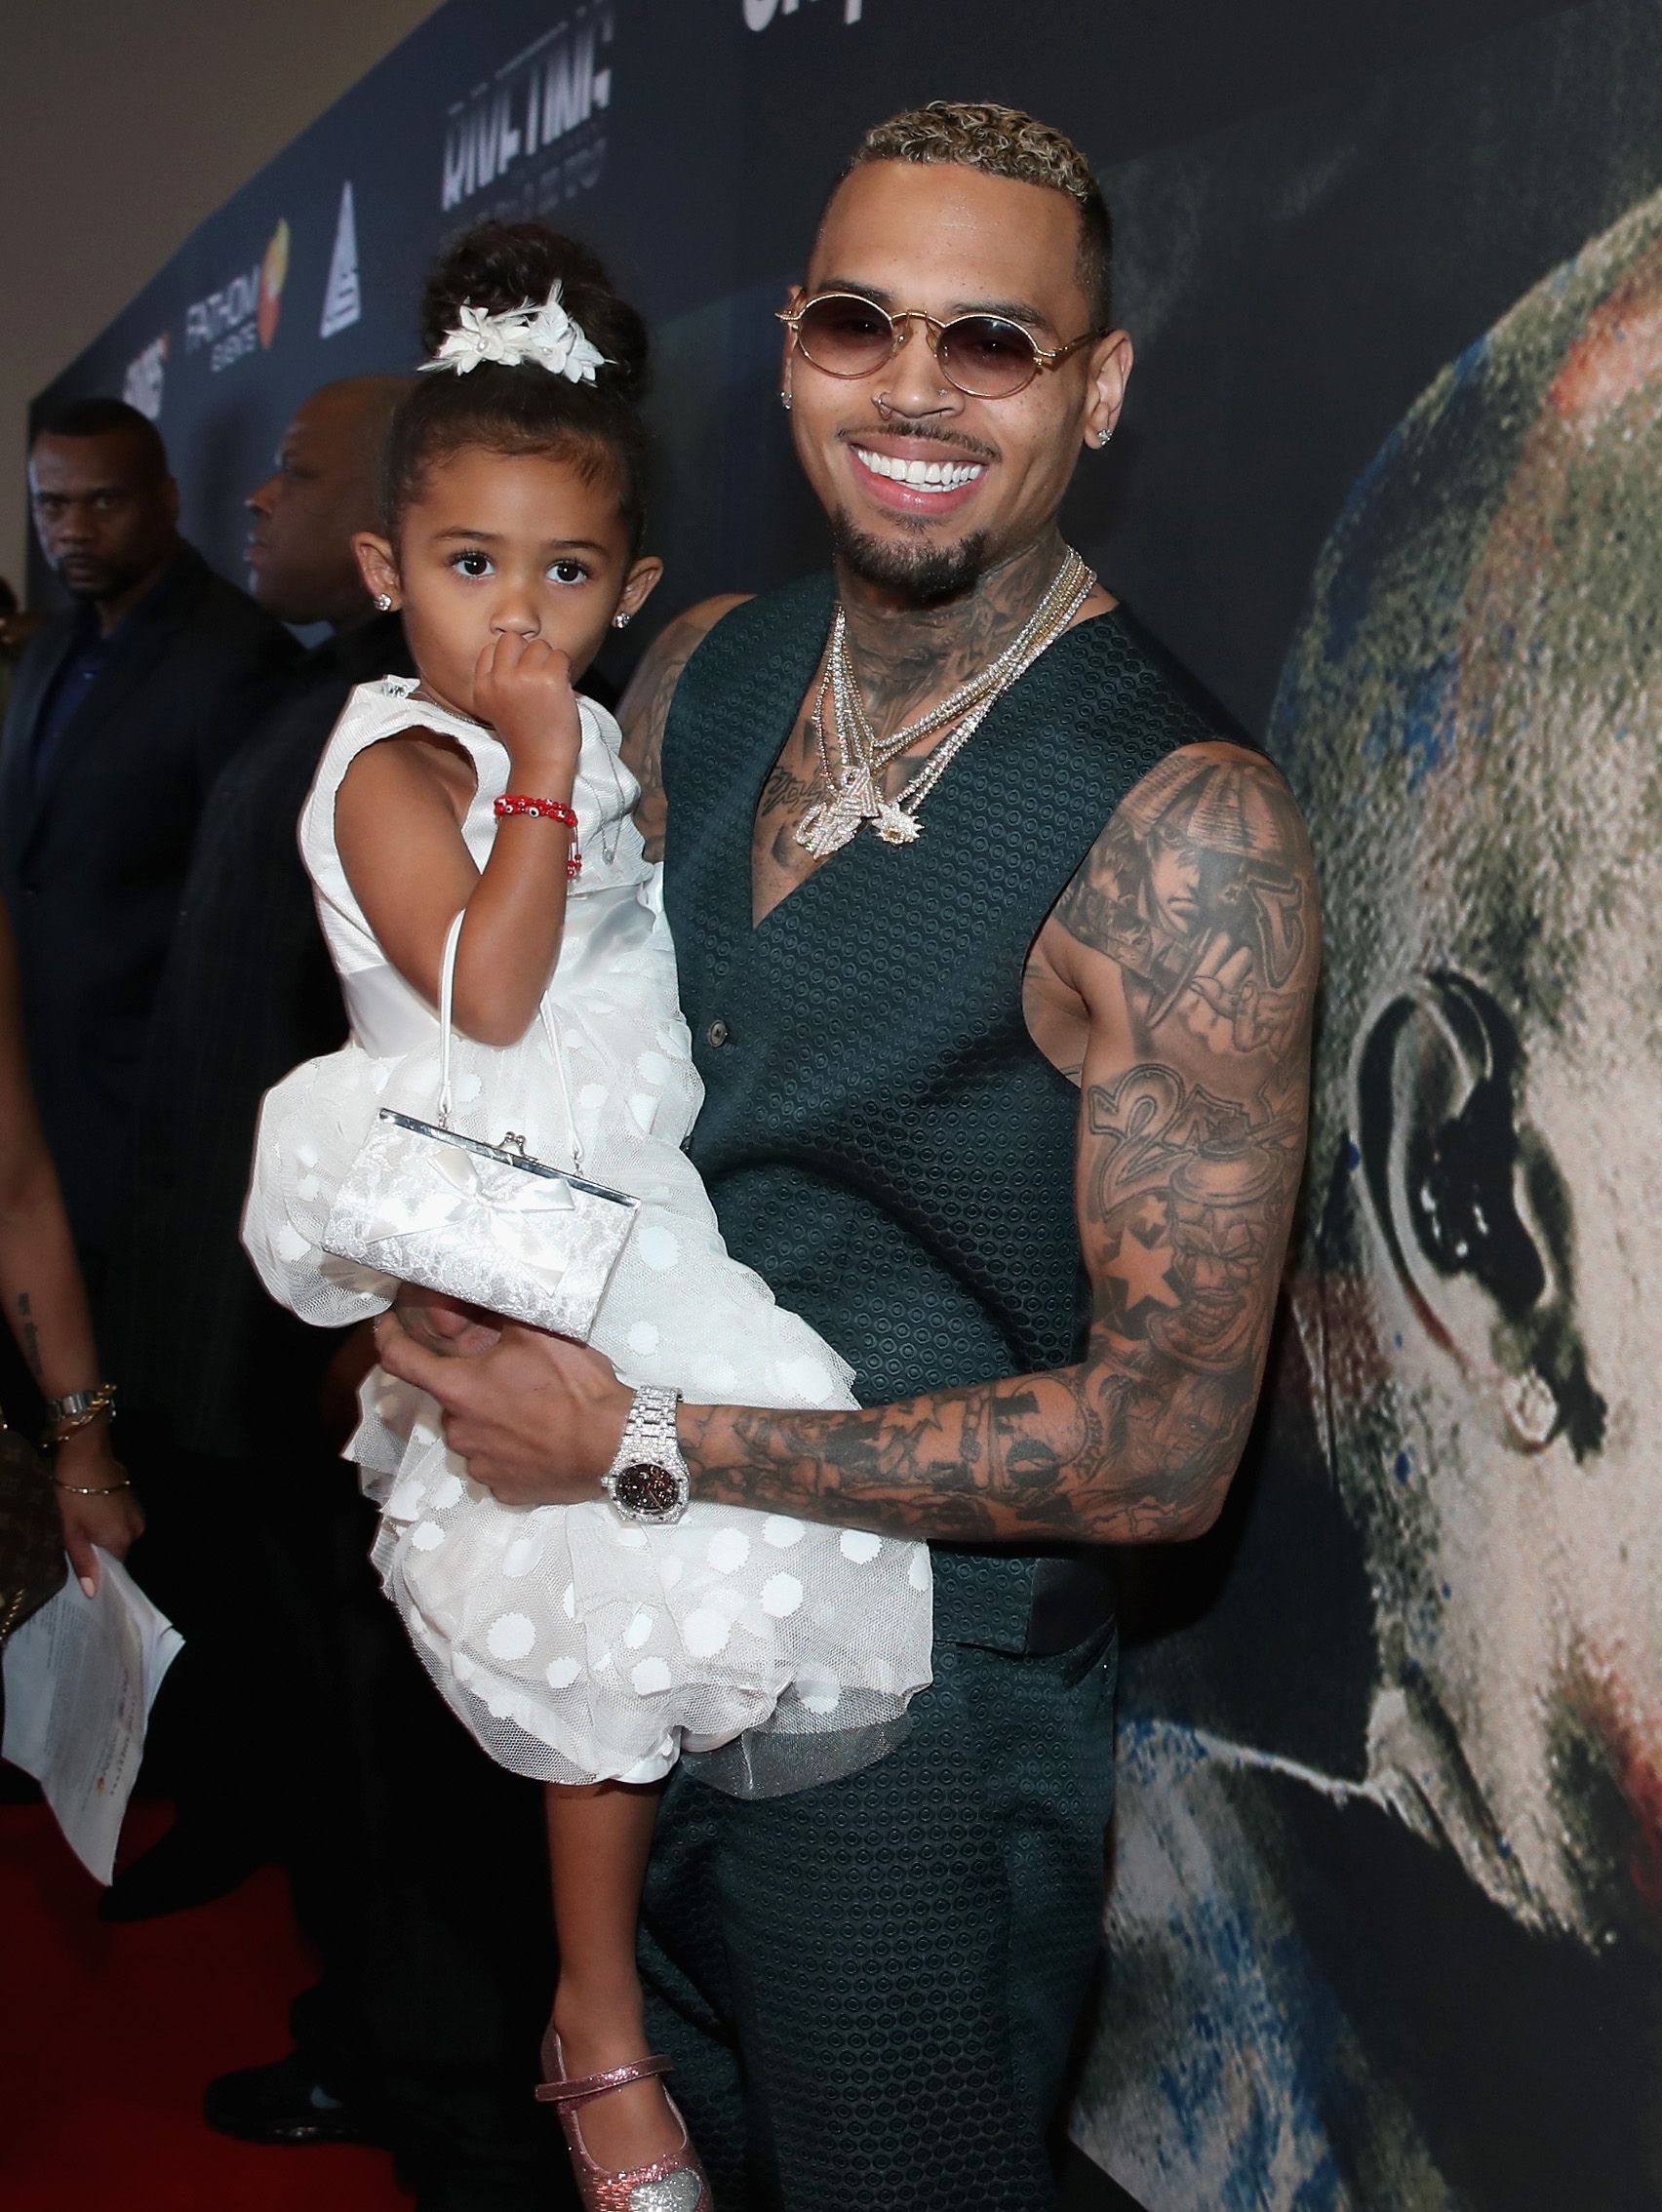 Chris Brown and his daughter Royalty at the premiere of Riveting Entertainment's "Chris Brown: Welcome To My Life" at L.A. LIVE on June 6, 2017 in Los Angeles, California. | Source: Getty Images